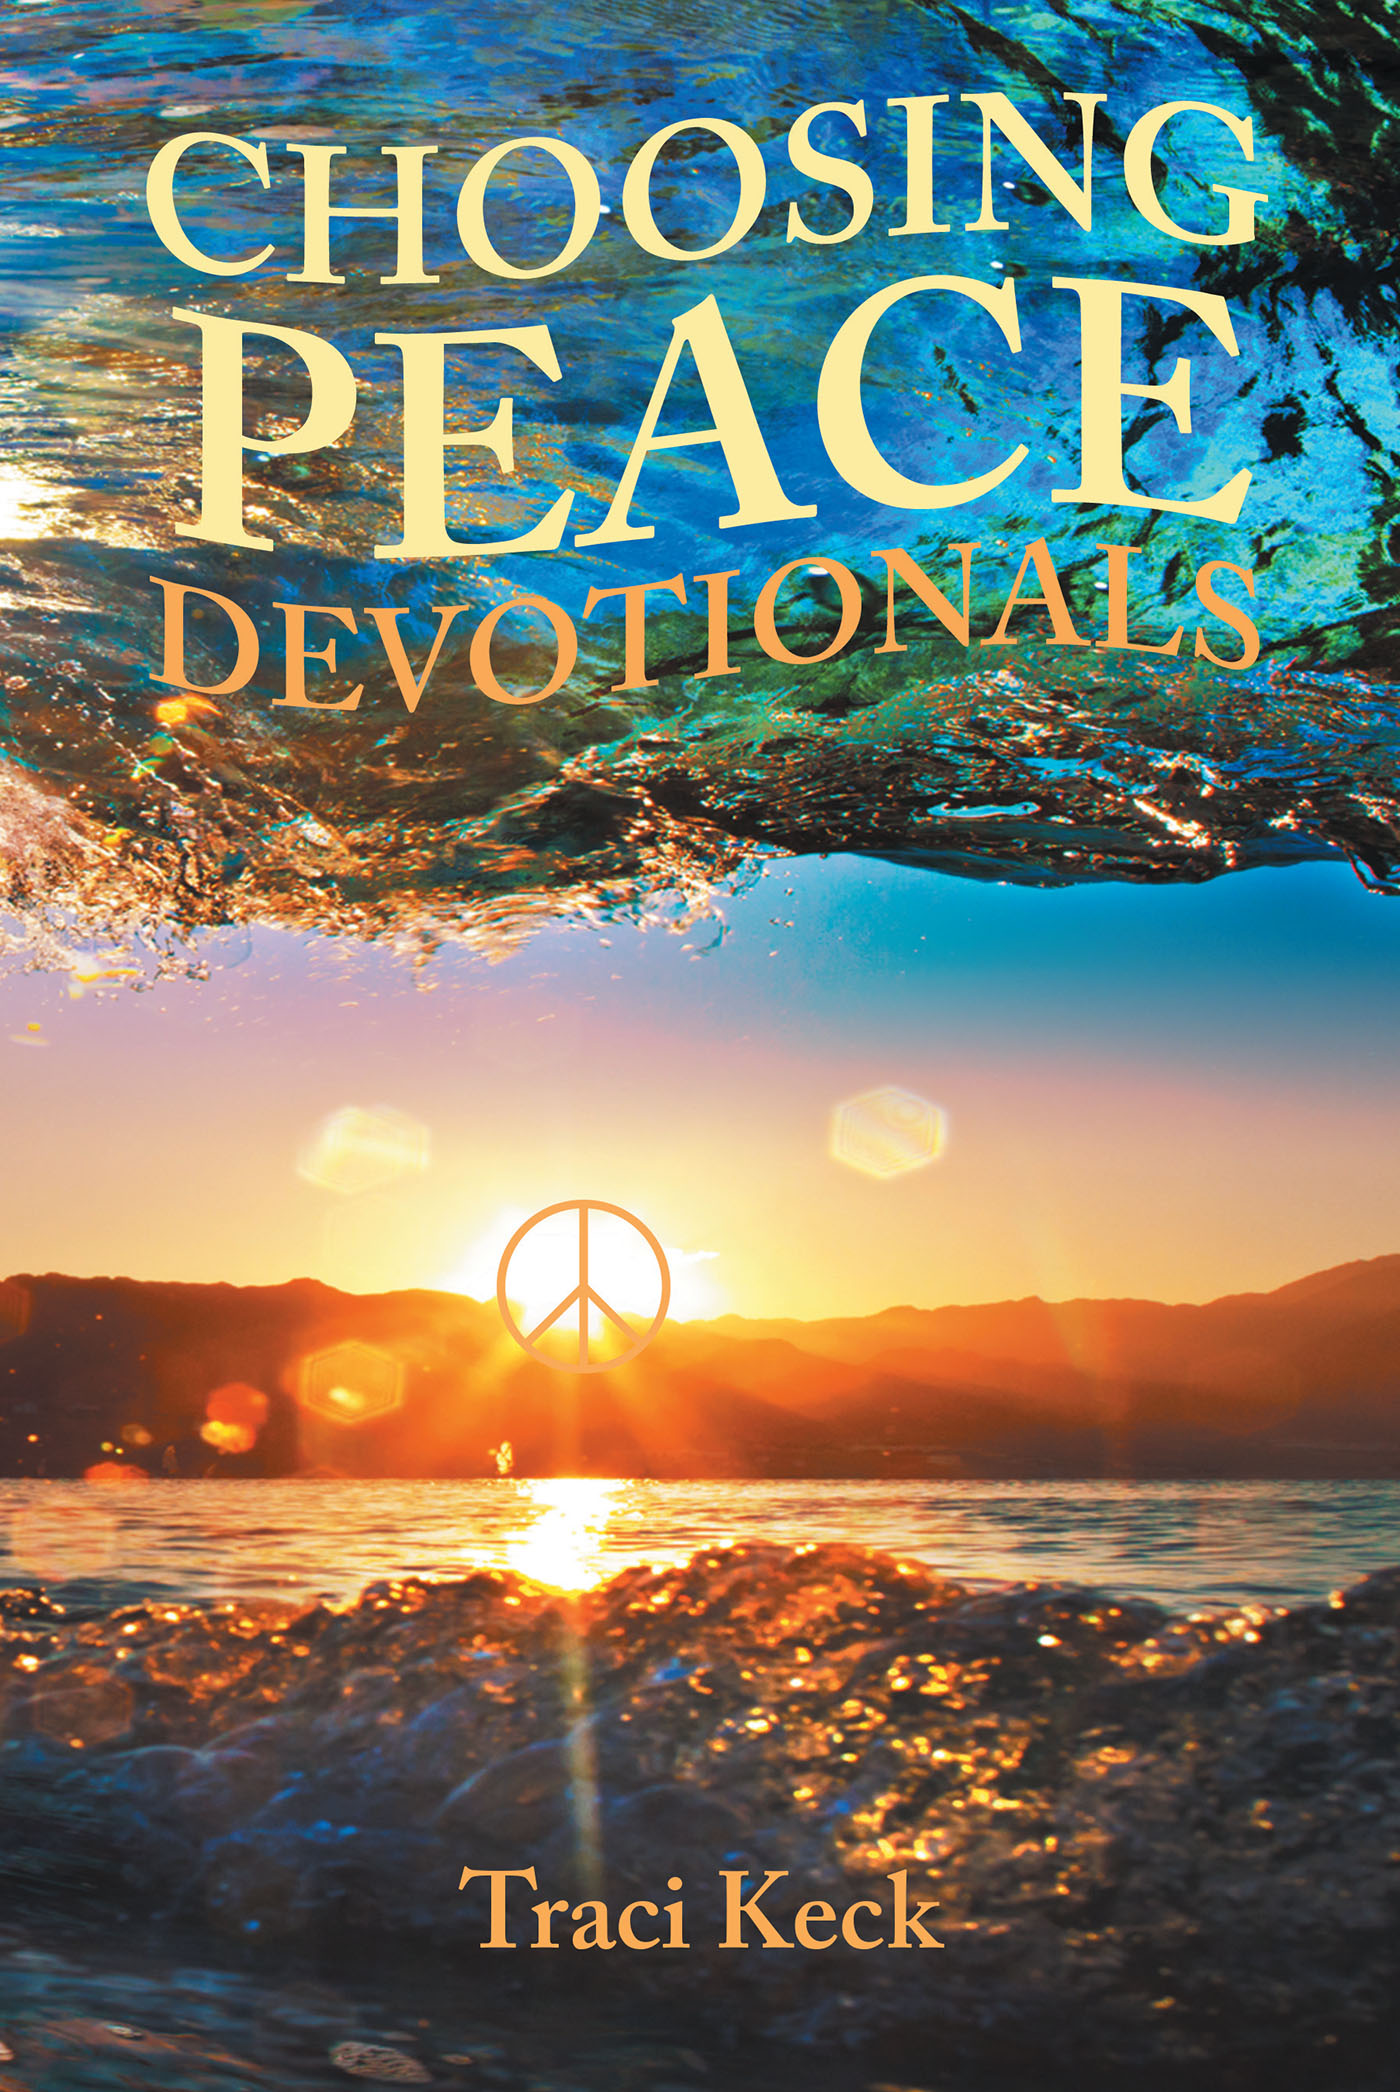 Author Traci Keck’s New Book, "Choosing Peace Devotionals," is a Collection of Daily Devotionals to Help Inspire Hope and Love to Carry Readers Through Life's Challenges